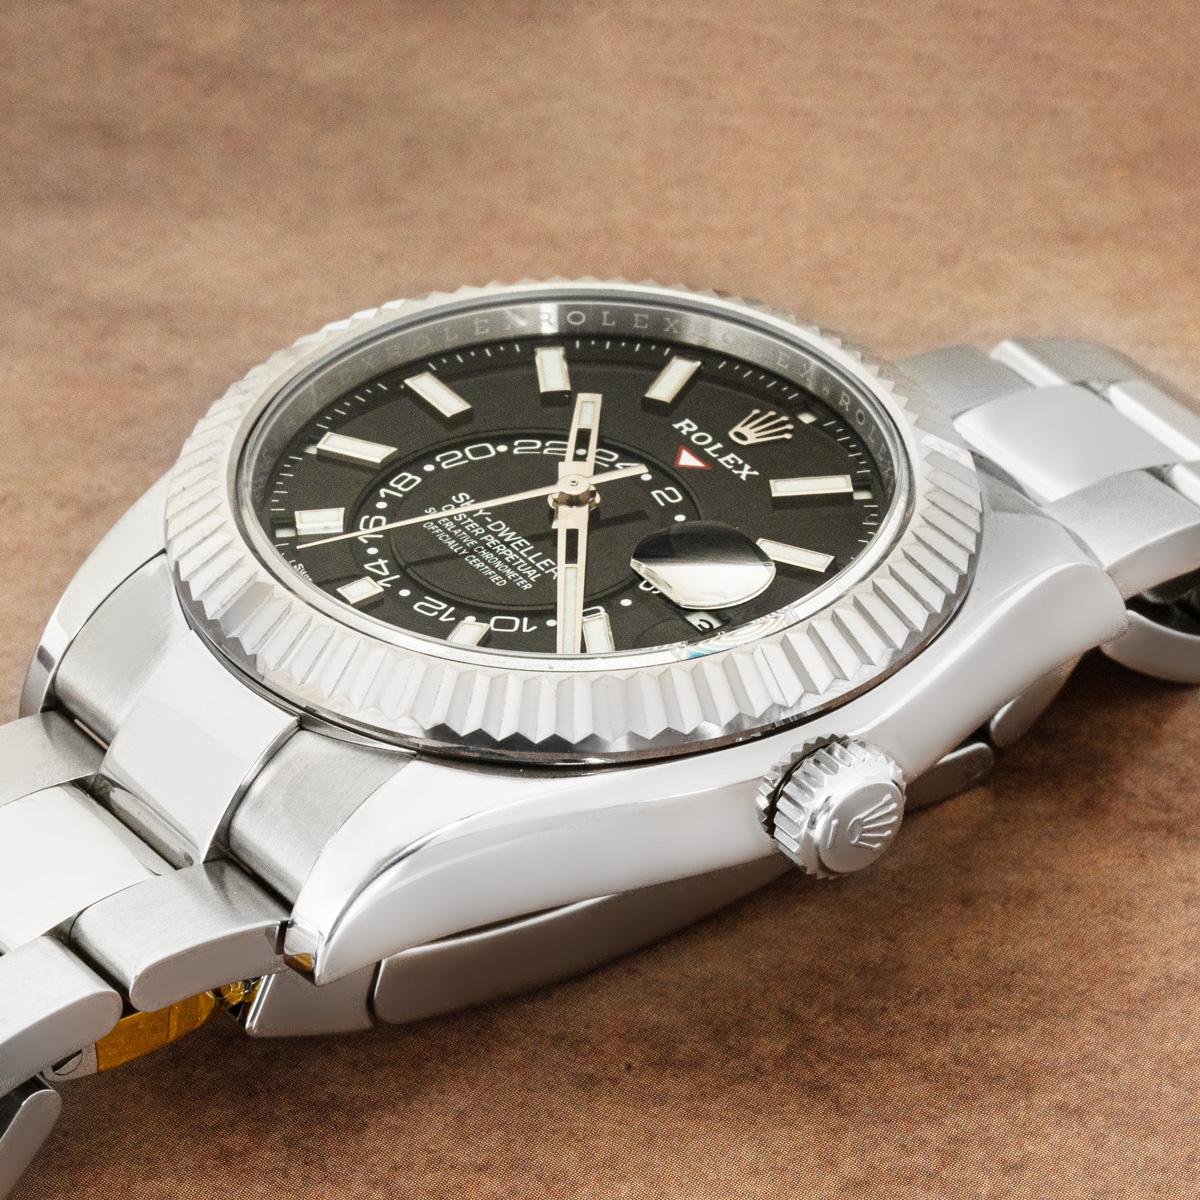 A stainless steel Sky-Dweller by Rolex. Featuring a black dial with the date, a month display via the 12 apertures, and a 24-hour display. The watch also features a second-time zone function, which can be set using the signature fluted,